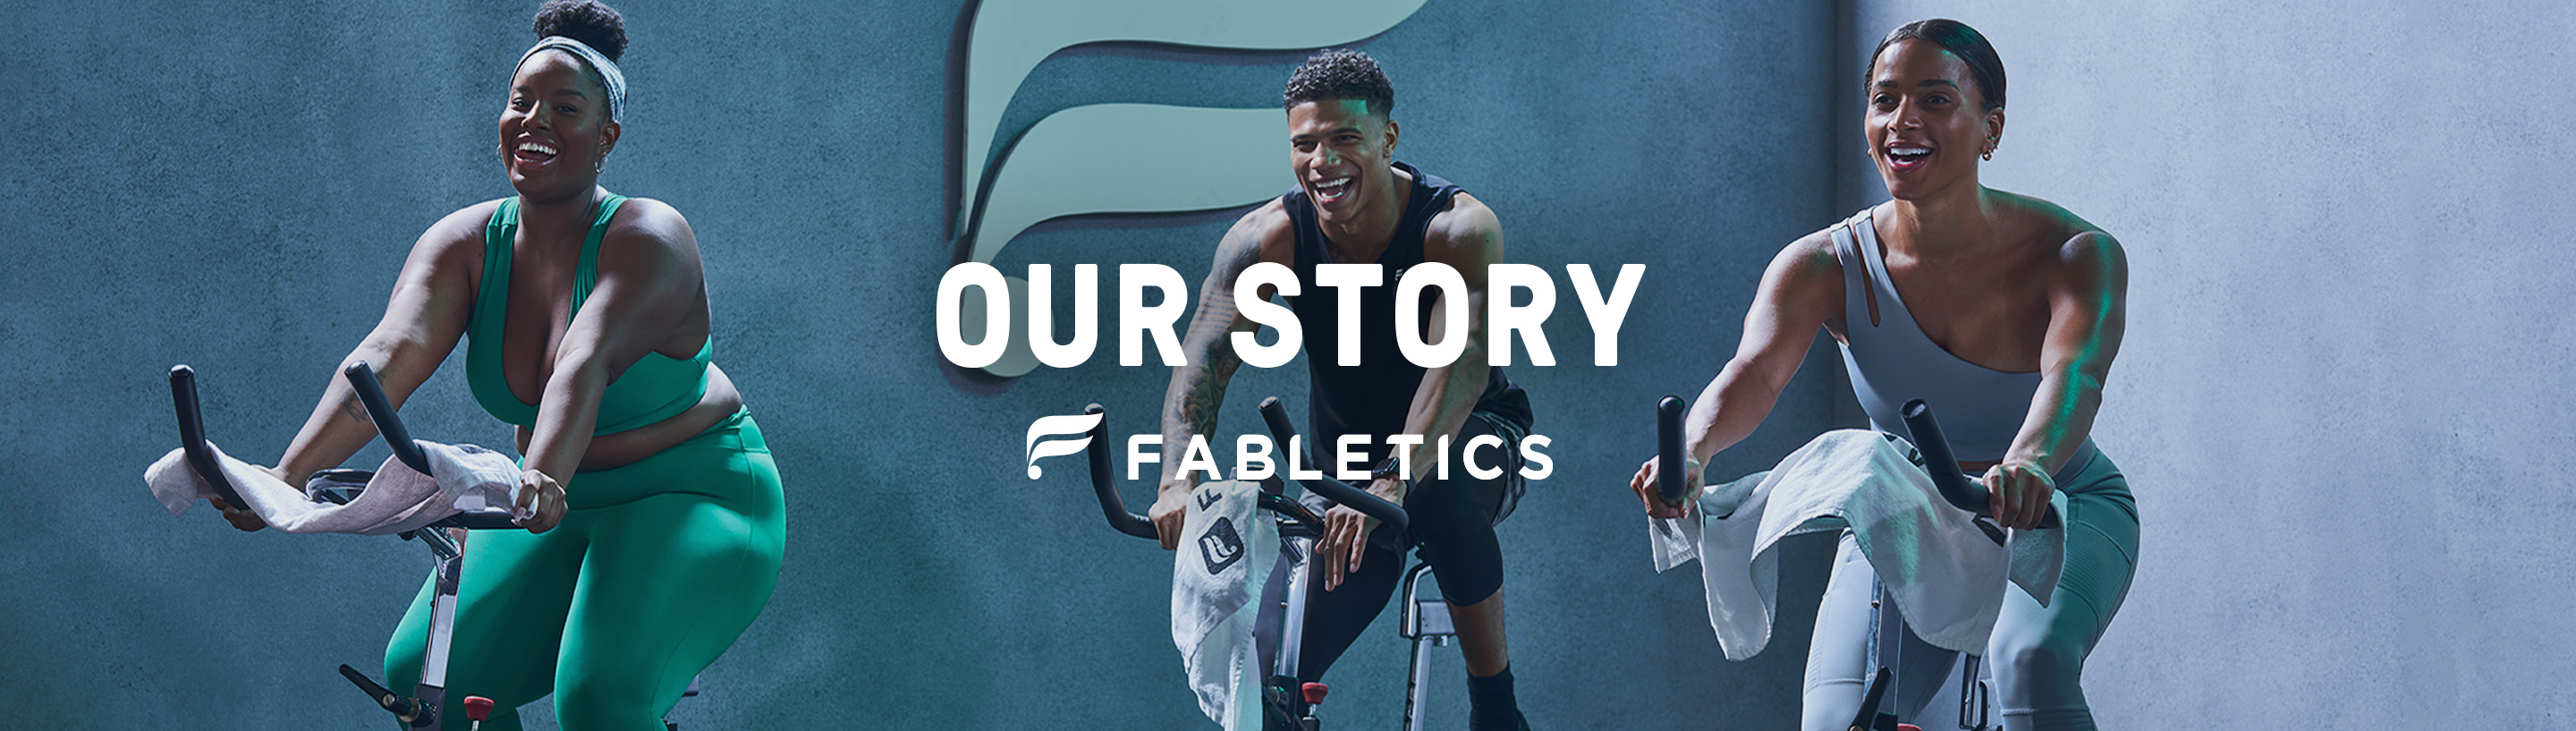 Fabletics Food Truck and Exclusive VIP Event